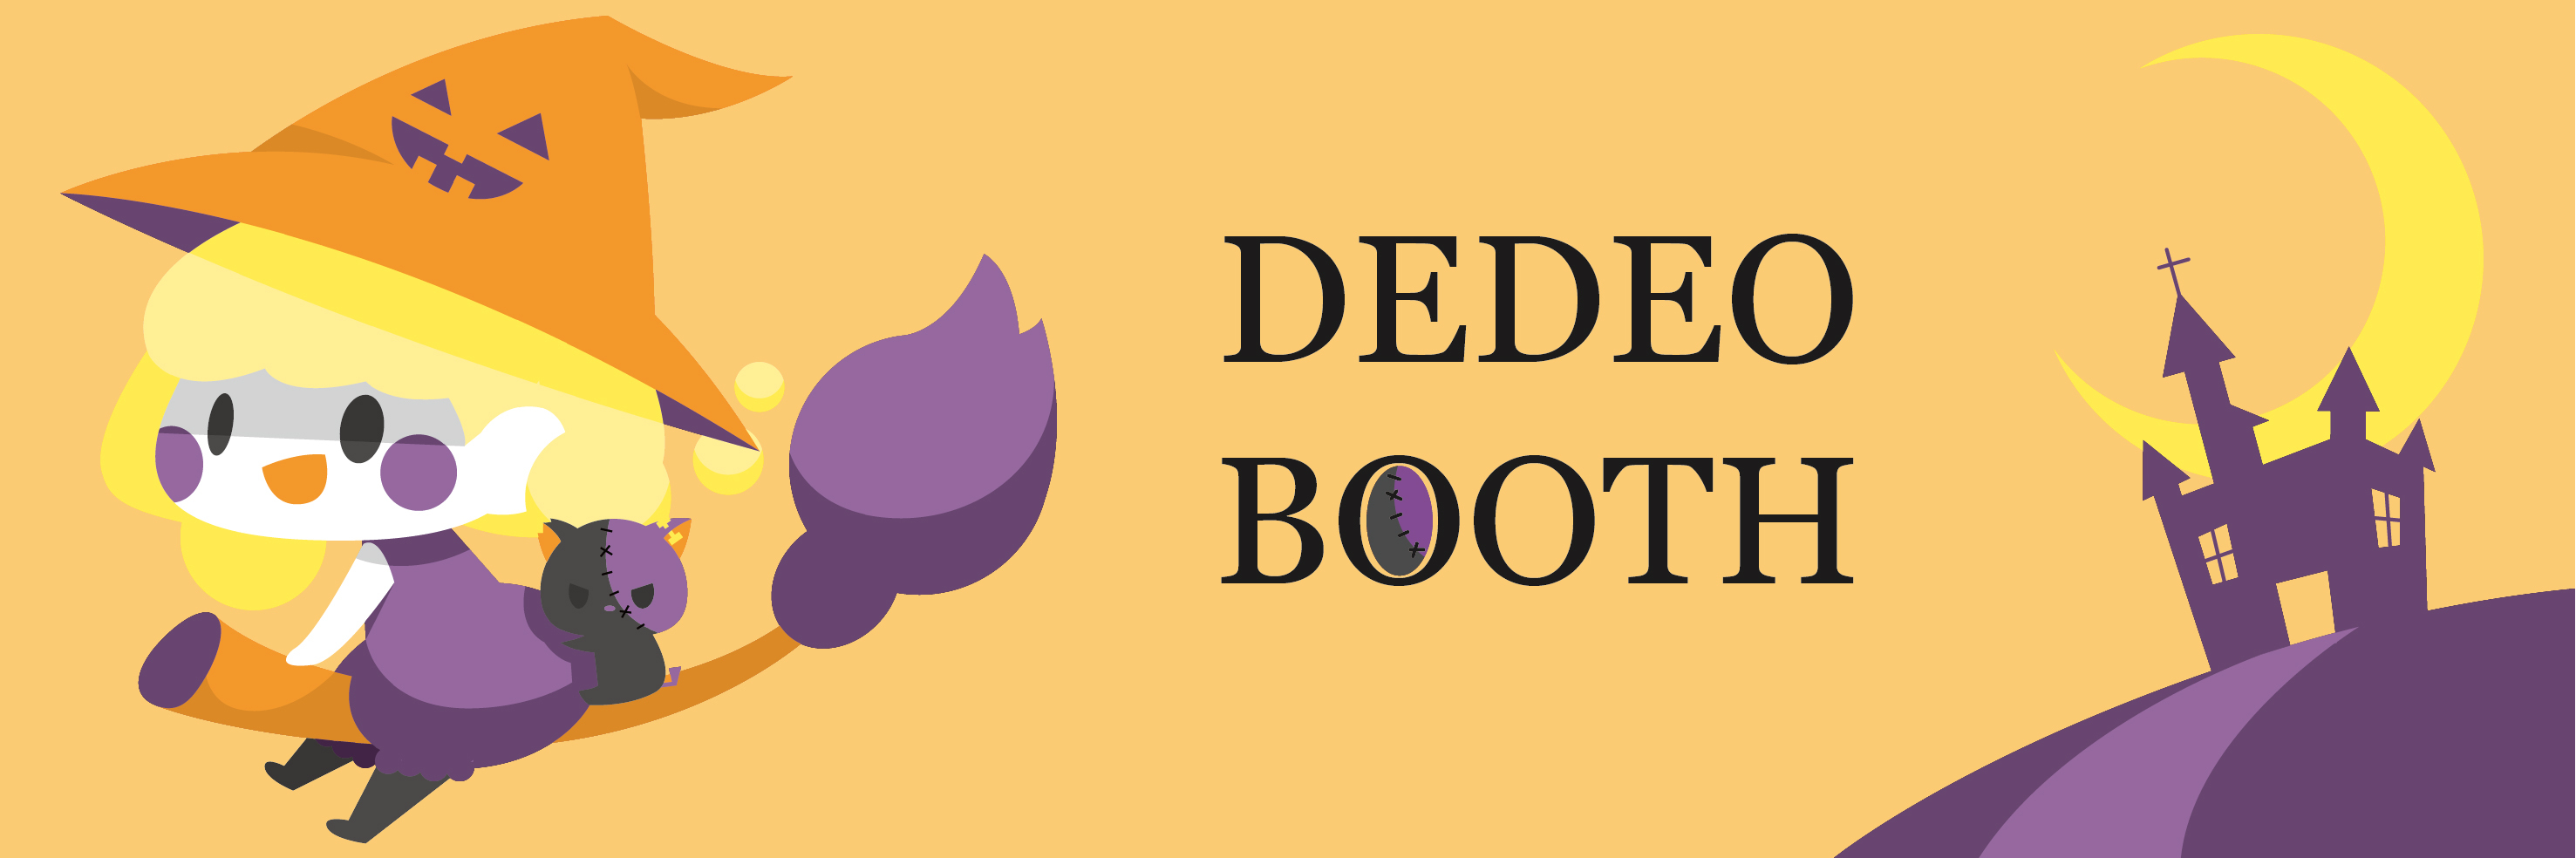 DEDEO BOOTH